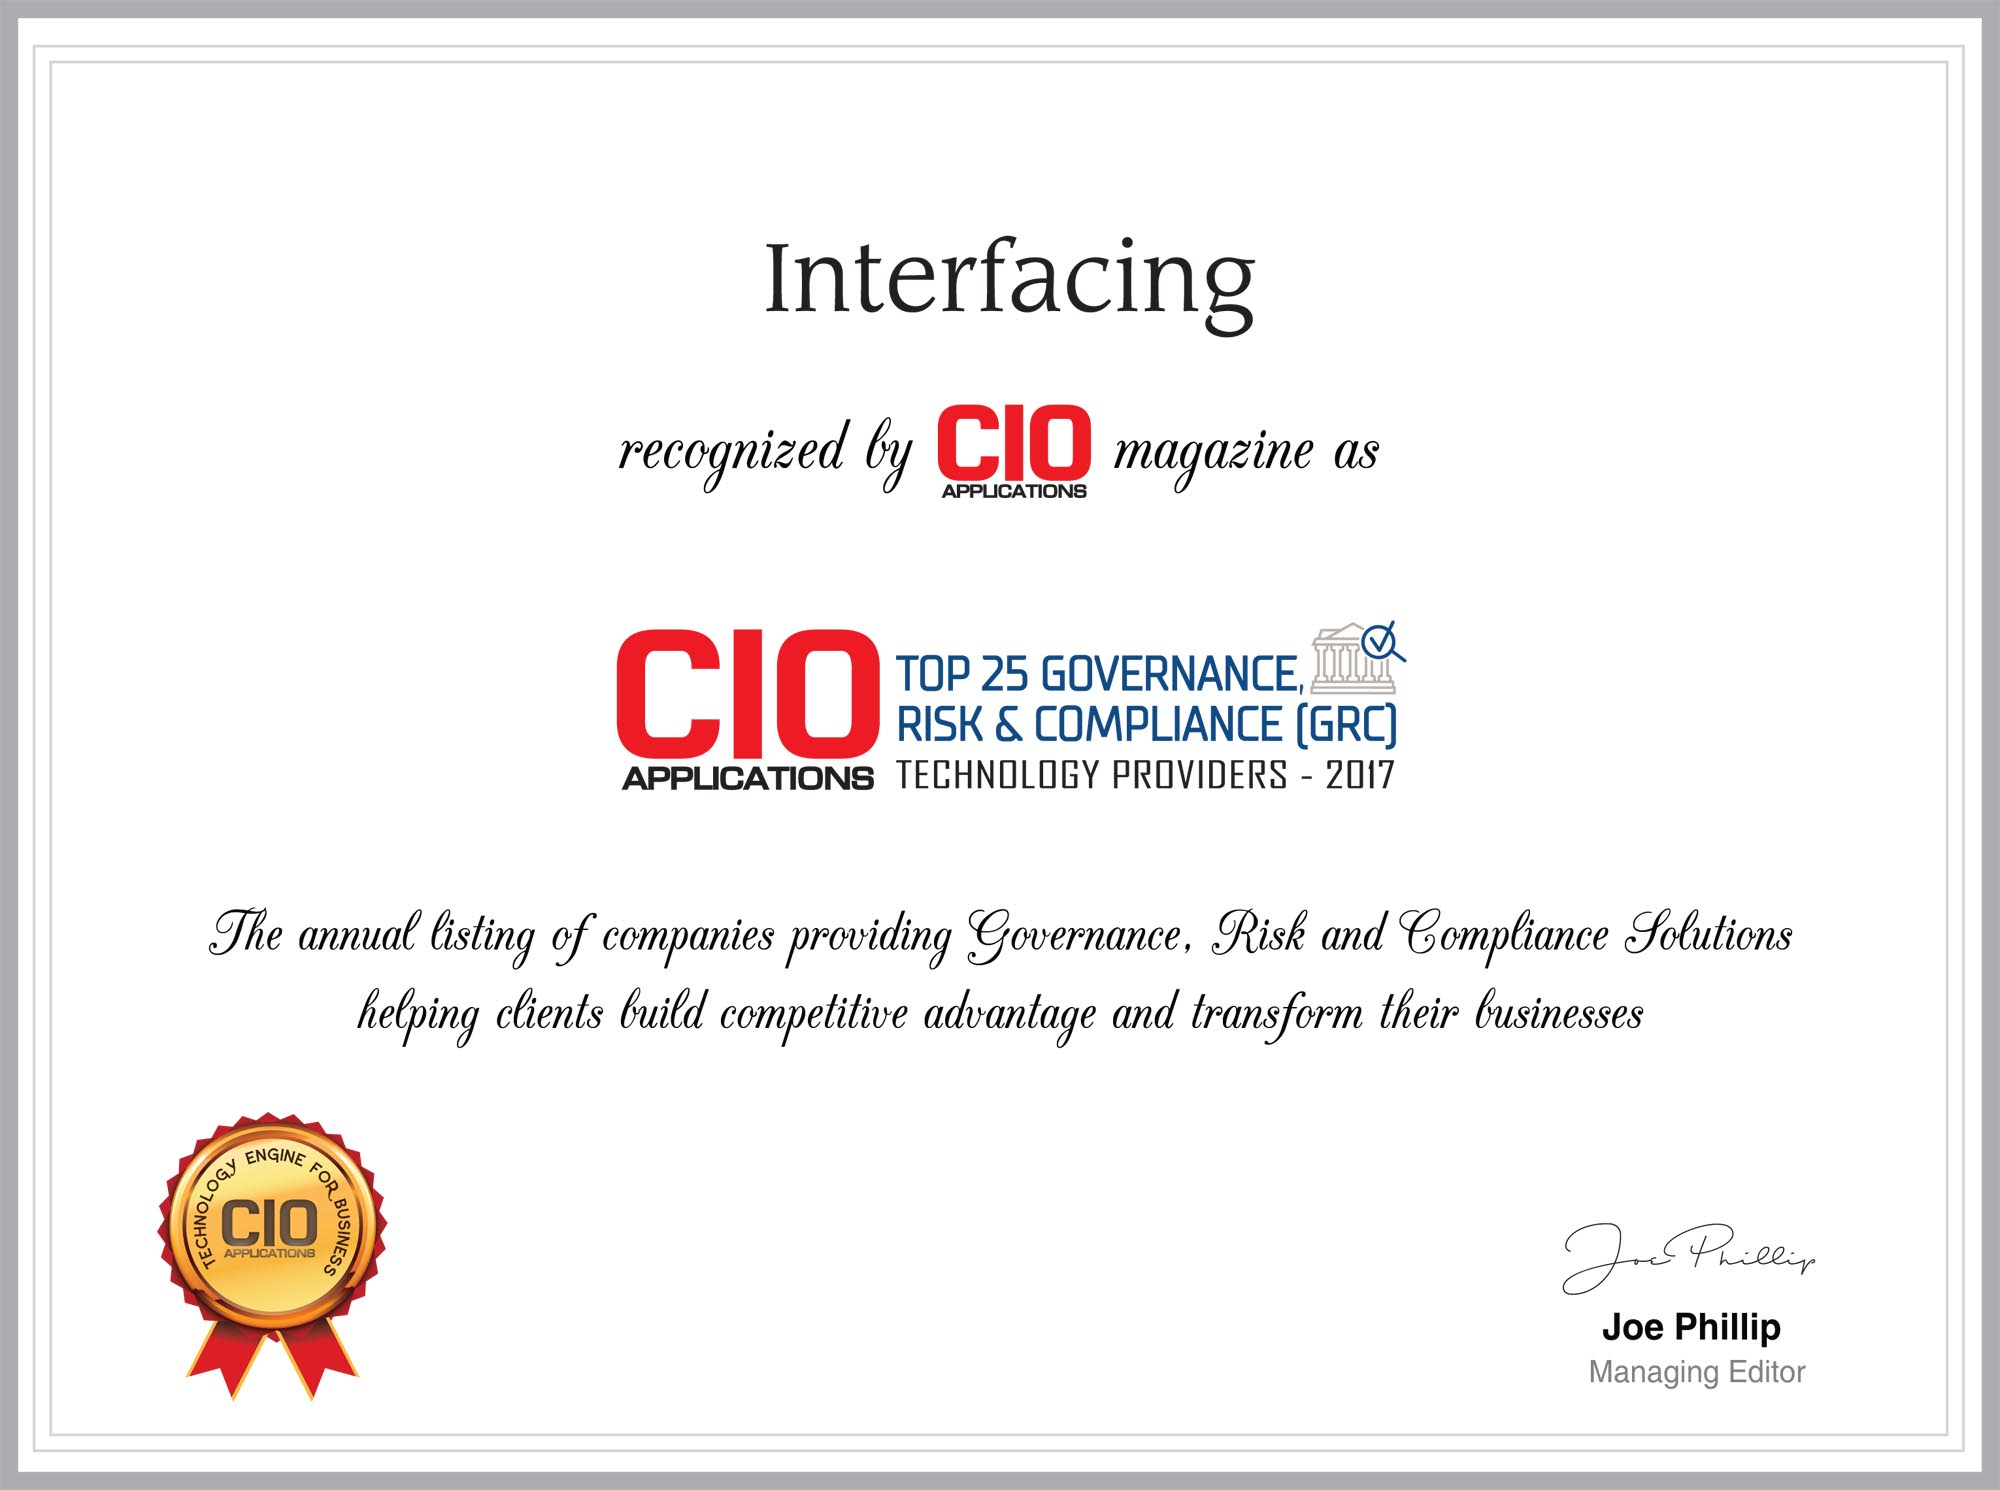 CIO Applications certificate for top 25 GRC solutions